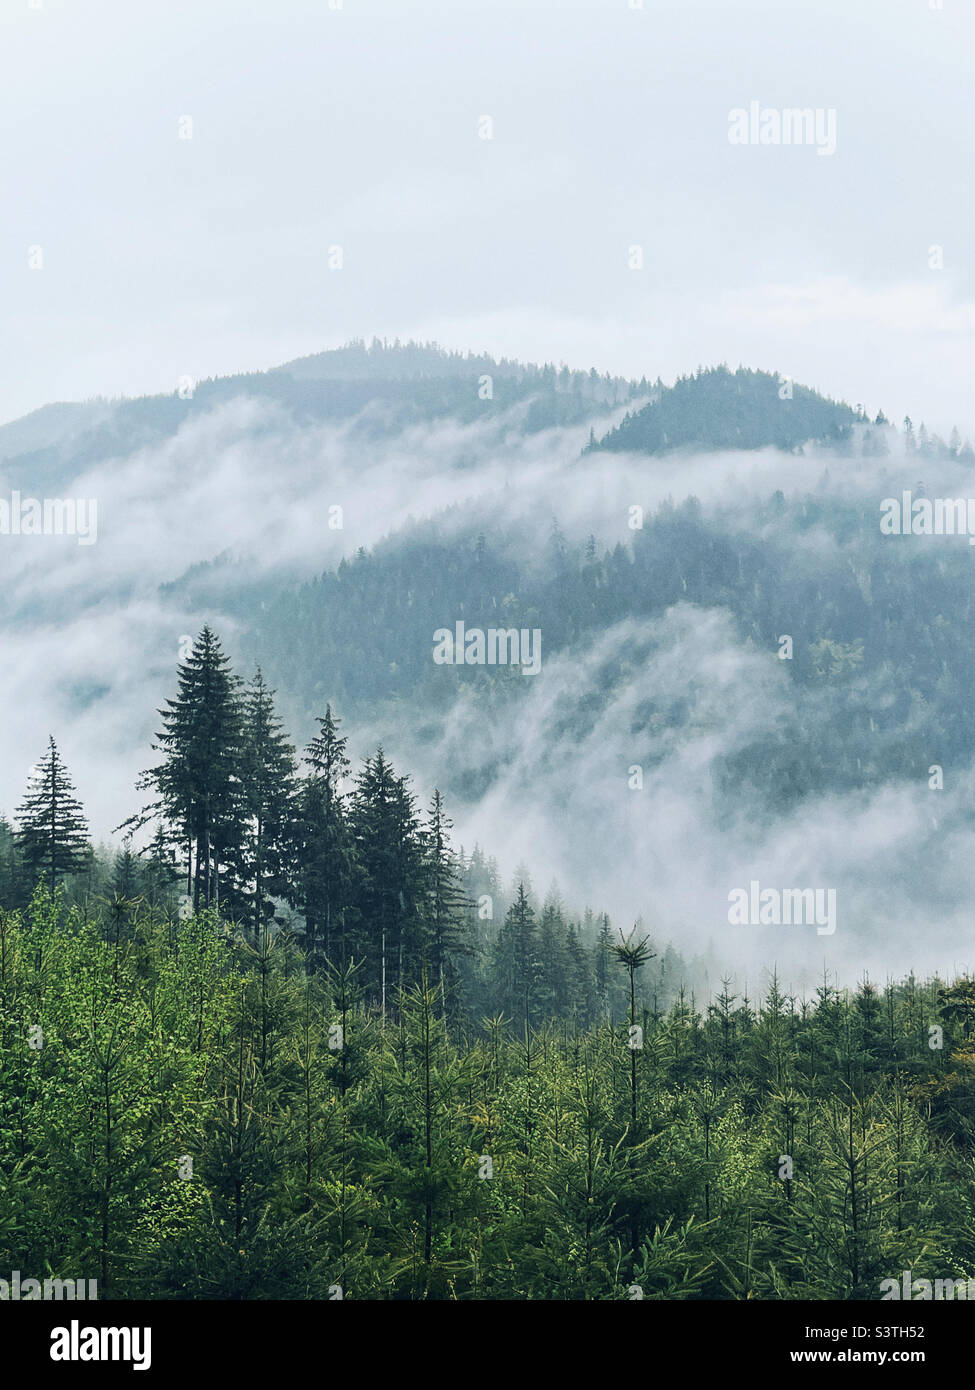 Cloud forest in misty mountains pnw Stock Photo